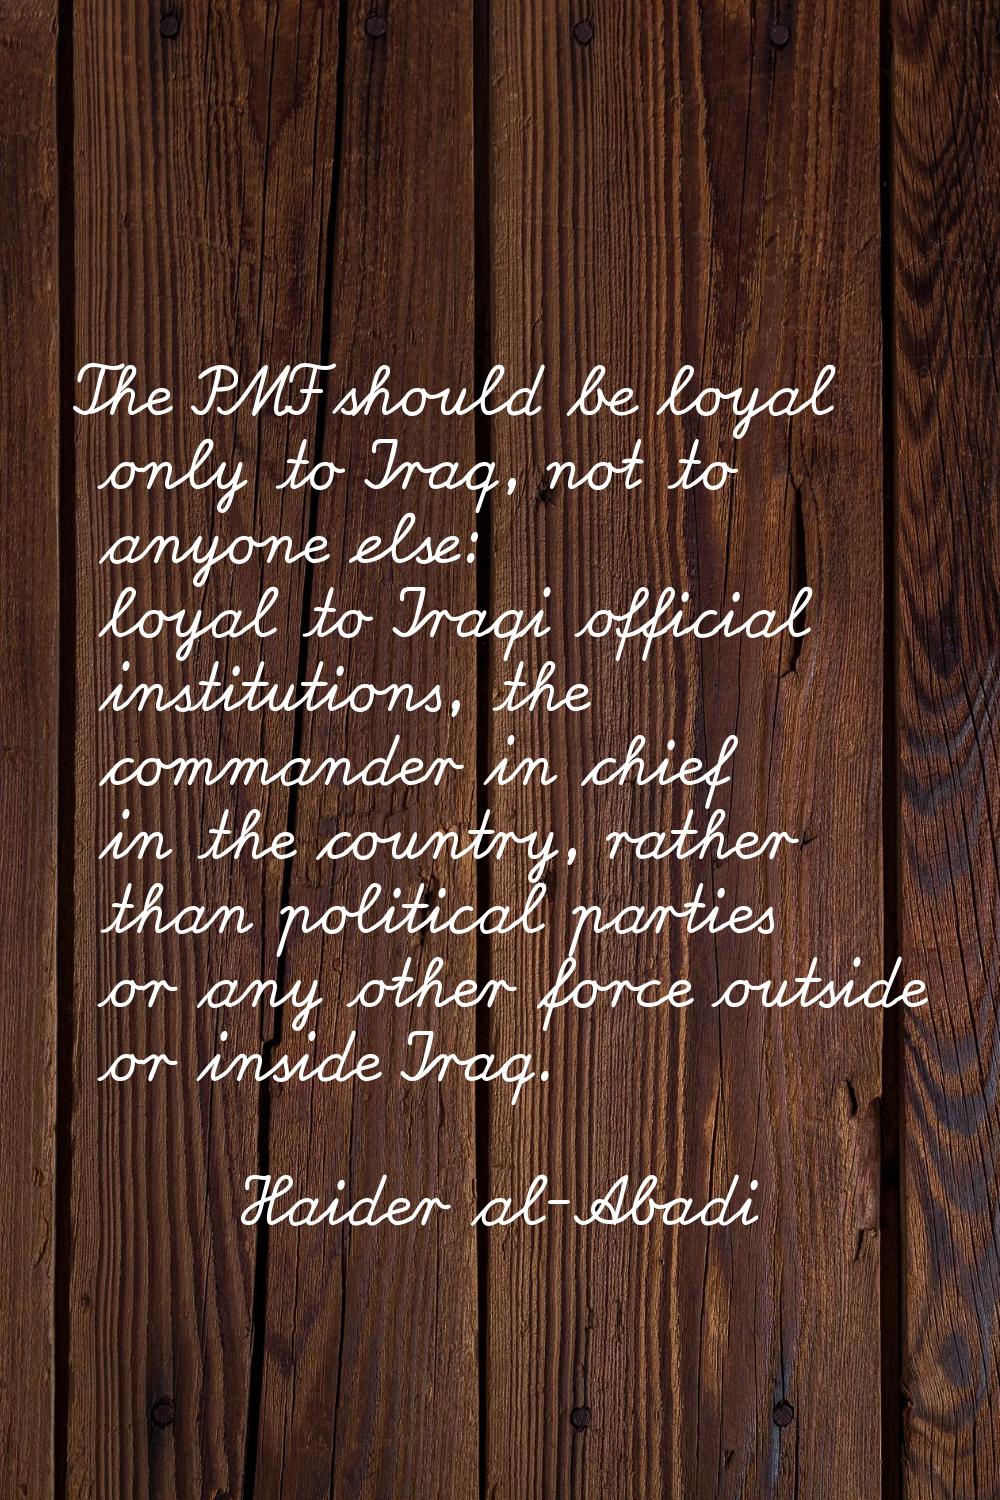 The PMF should be loyal only to Iraq, not to anyone else: loyal to Iraqi official institutions, the